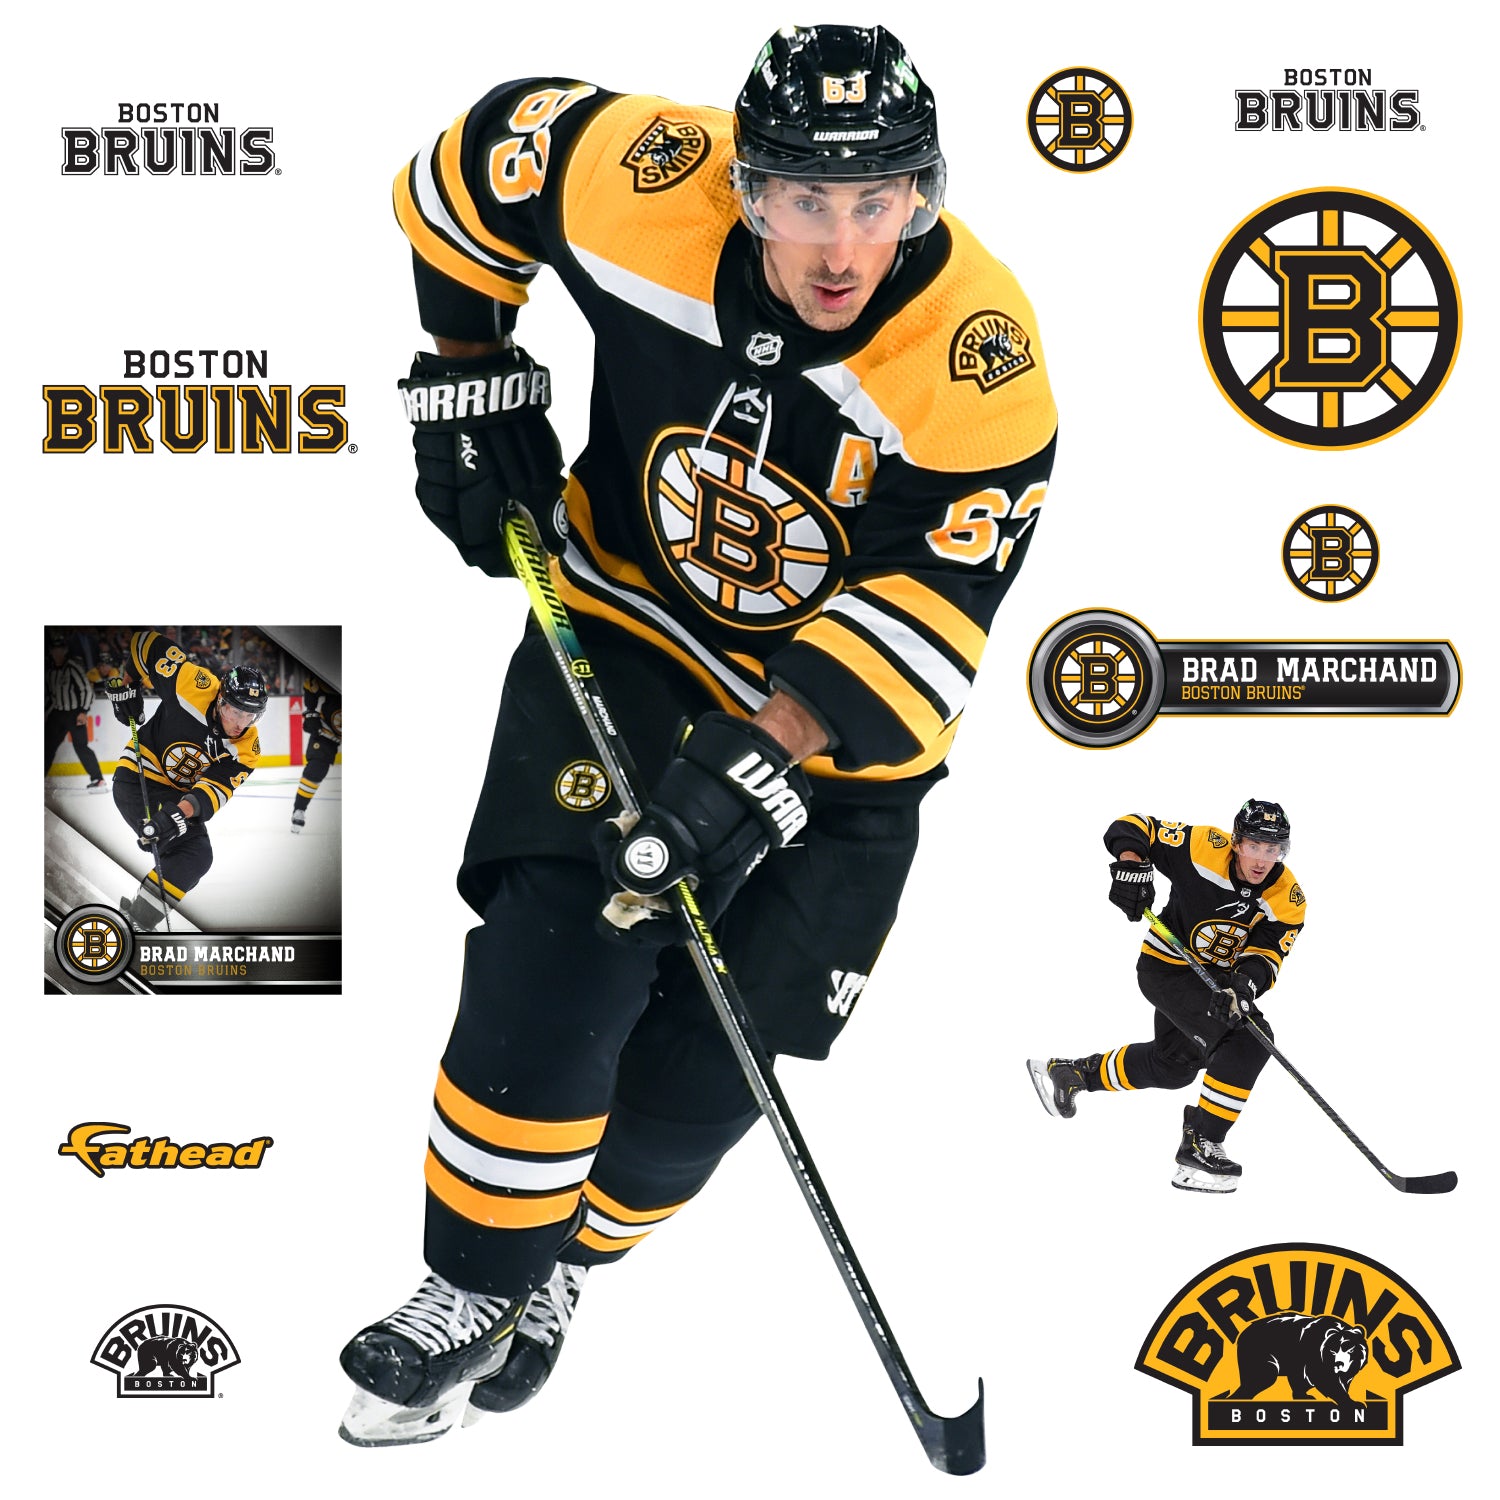 Boston Bruins stand in the NHL store